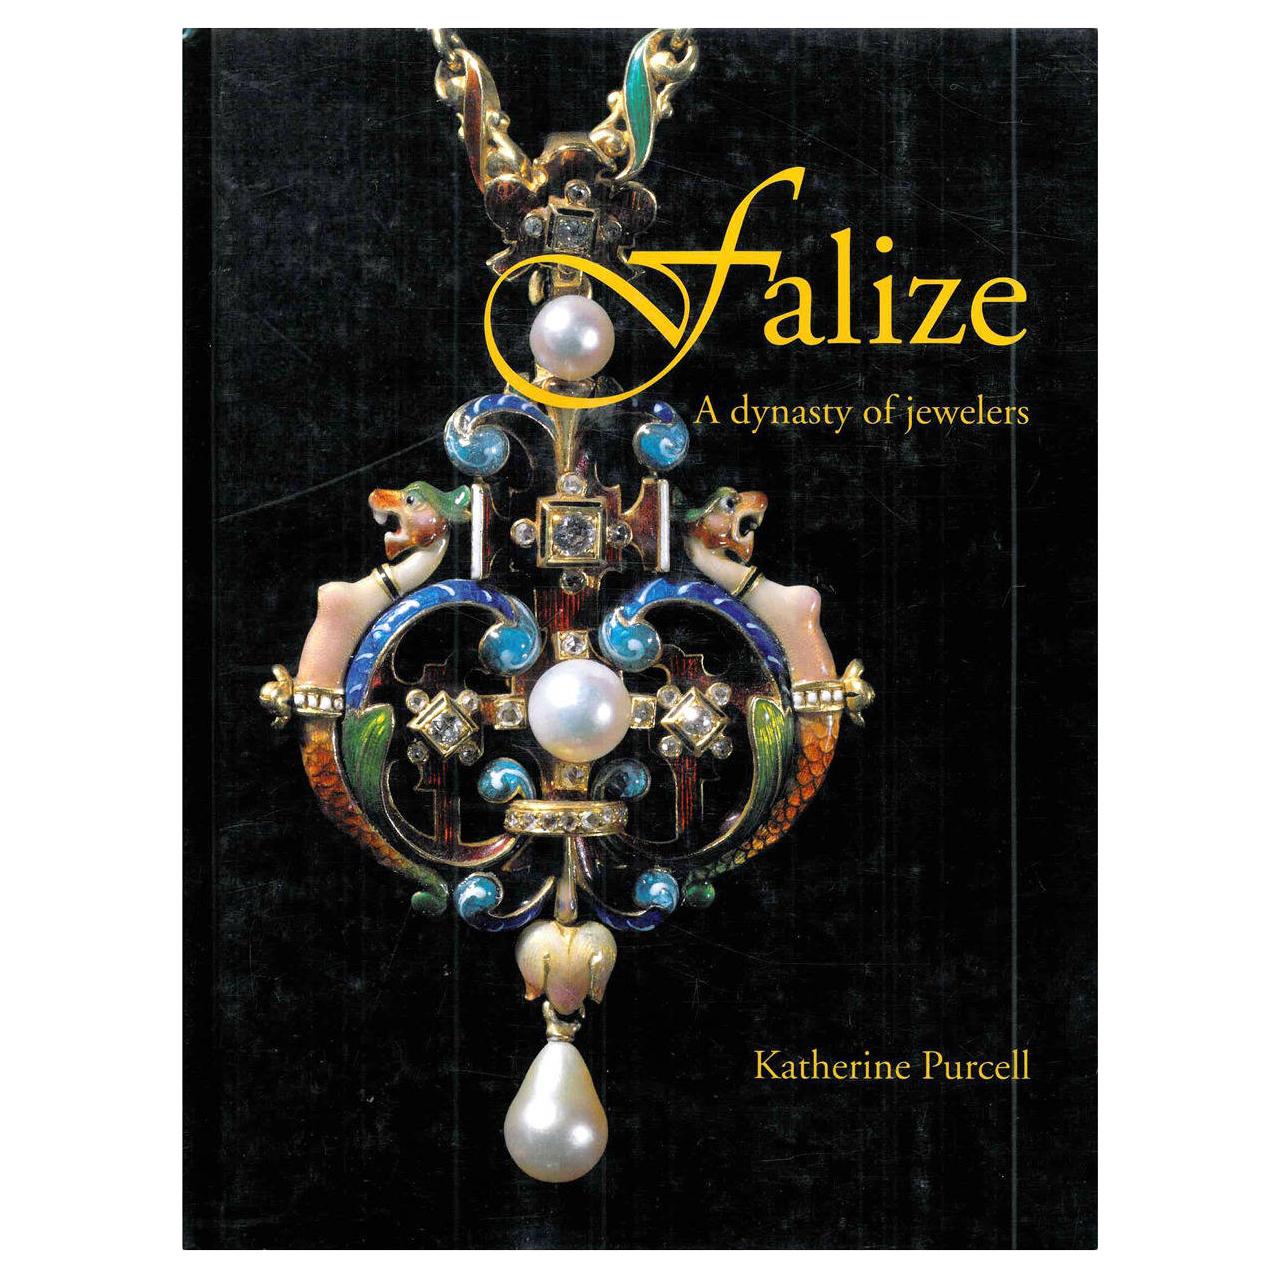 Book of Falize, a Dynasty of Jewelers